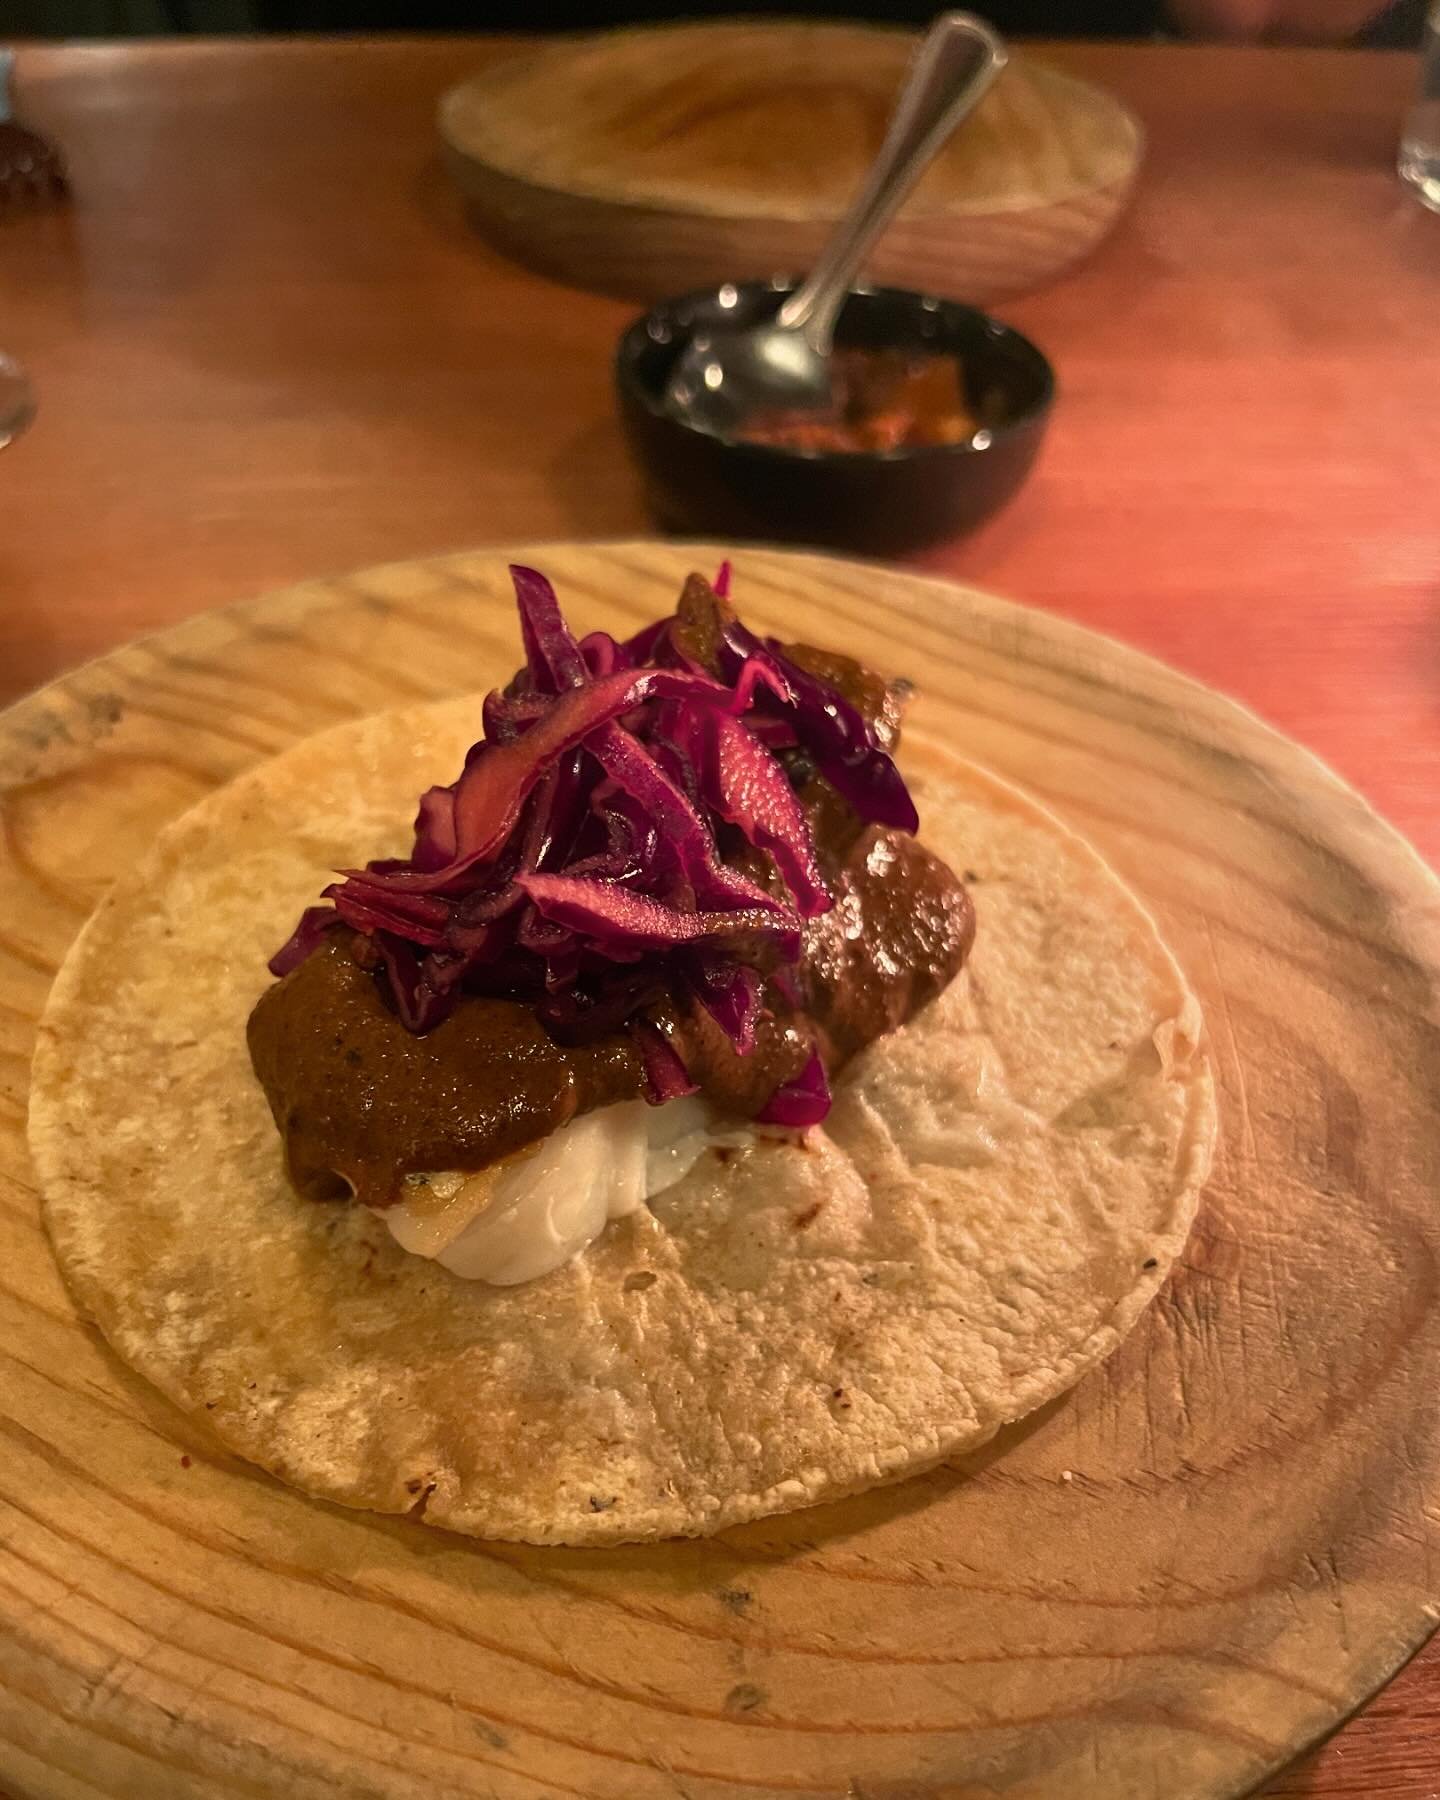 Highlights from a little foodie adventure last night. @haaaaashhhhhhi is doing a stint at @carousel_ldn and it&rsquo;s a Japanese/Mexican fusion. I have to say that mole sauce on the fish taco&hellip;😵 So many complex layers of flavors I wish I coul